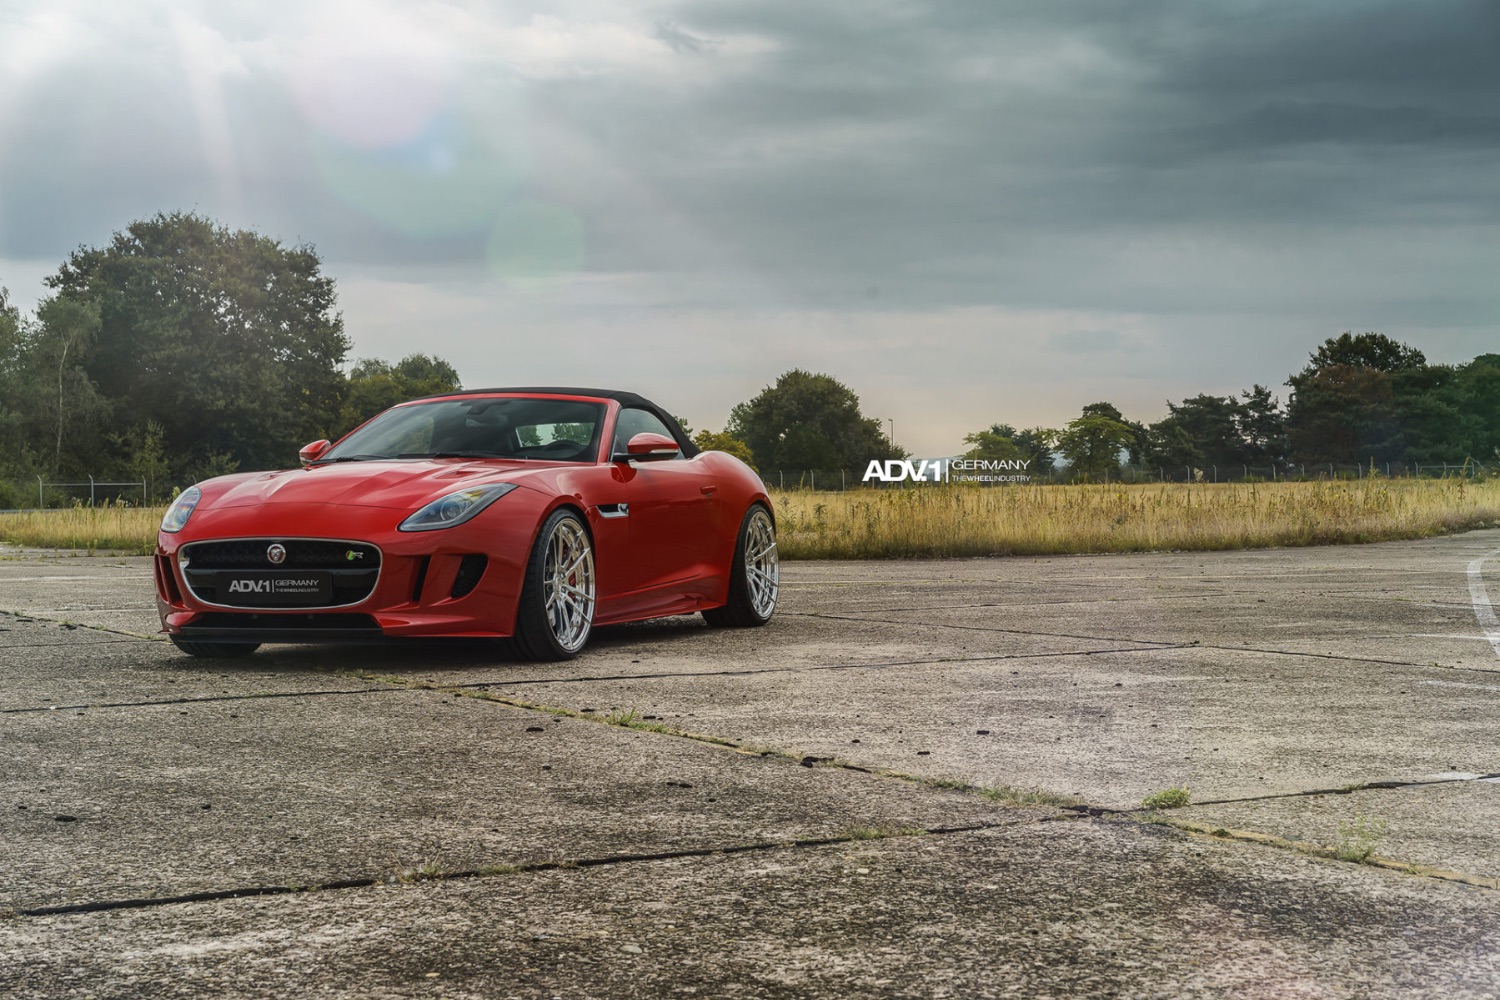 jaguar-f-type-cabriolet-convertible-red-aftermarket-lowered-chrome-luxury-adv1-wheels-forged-i